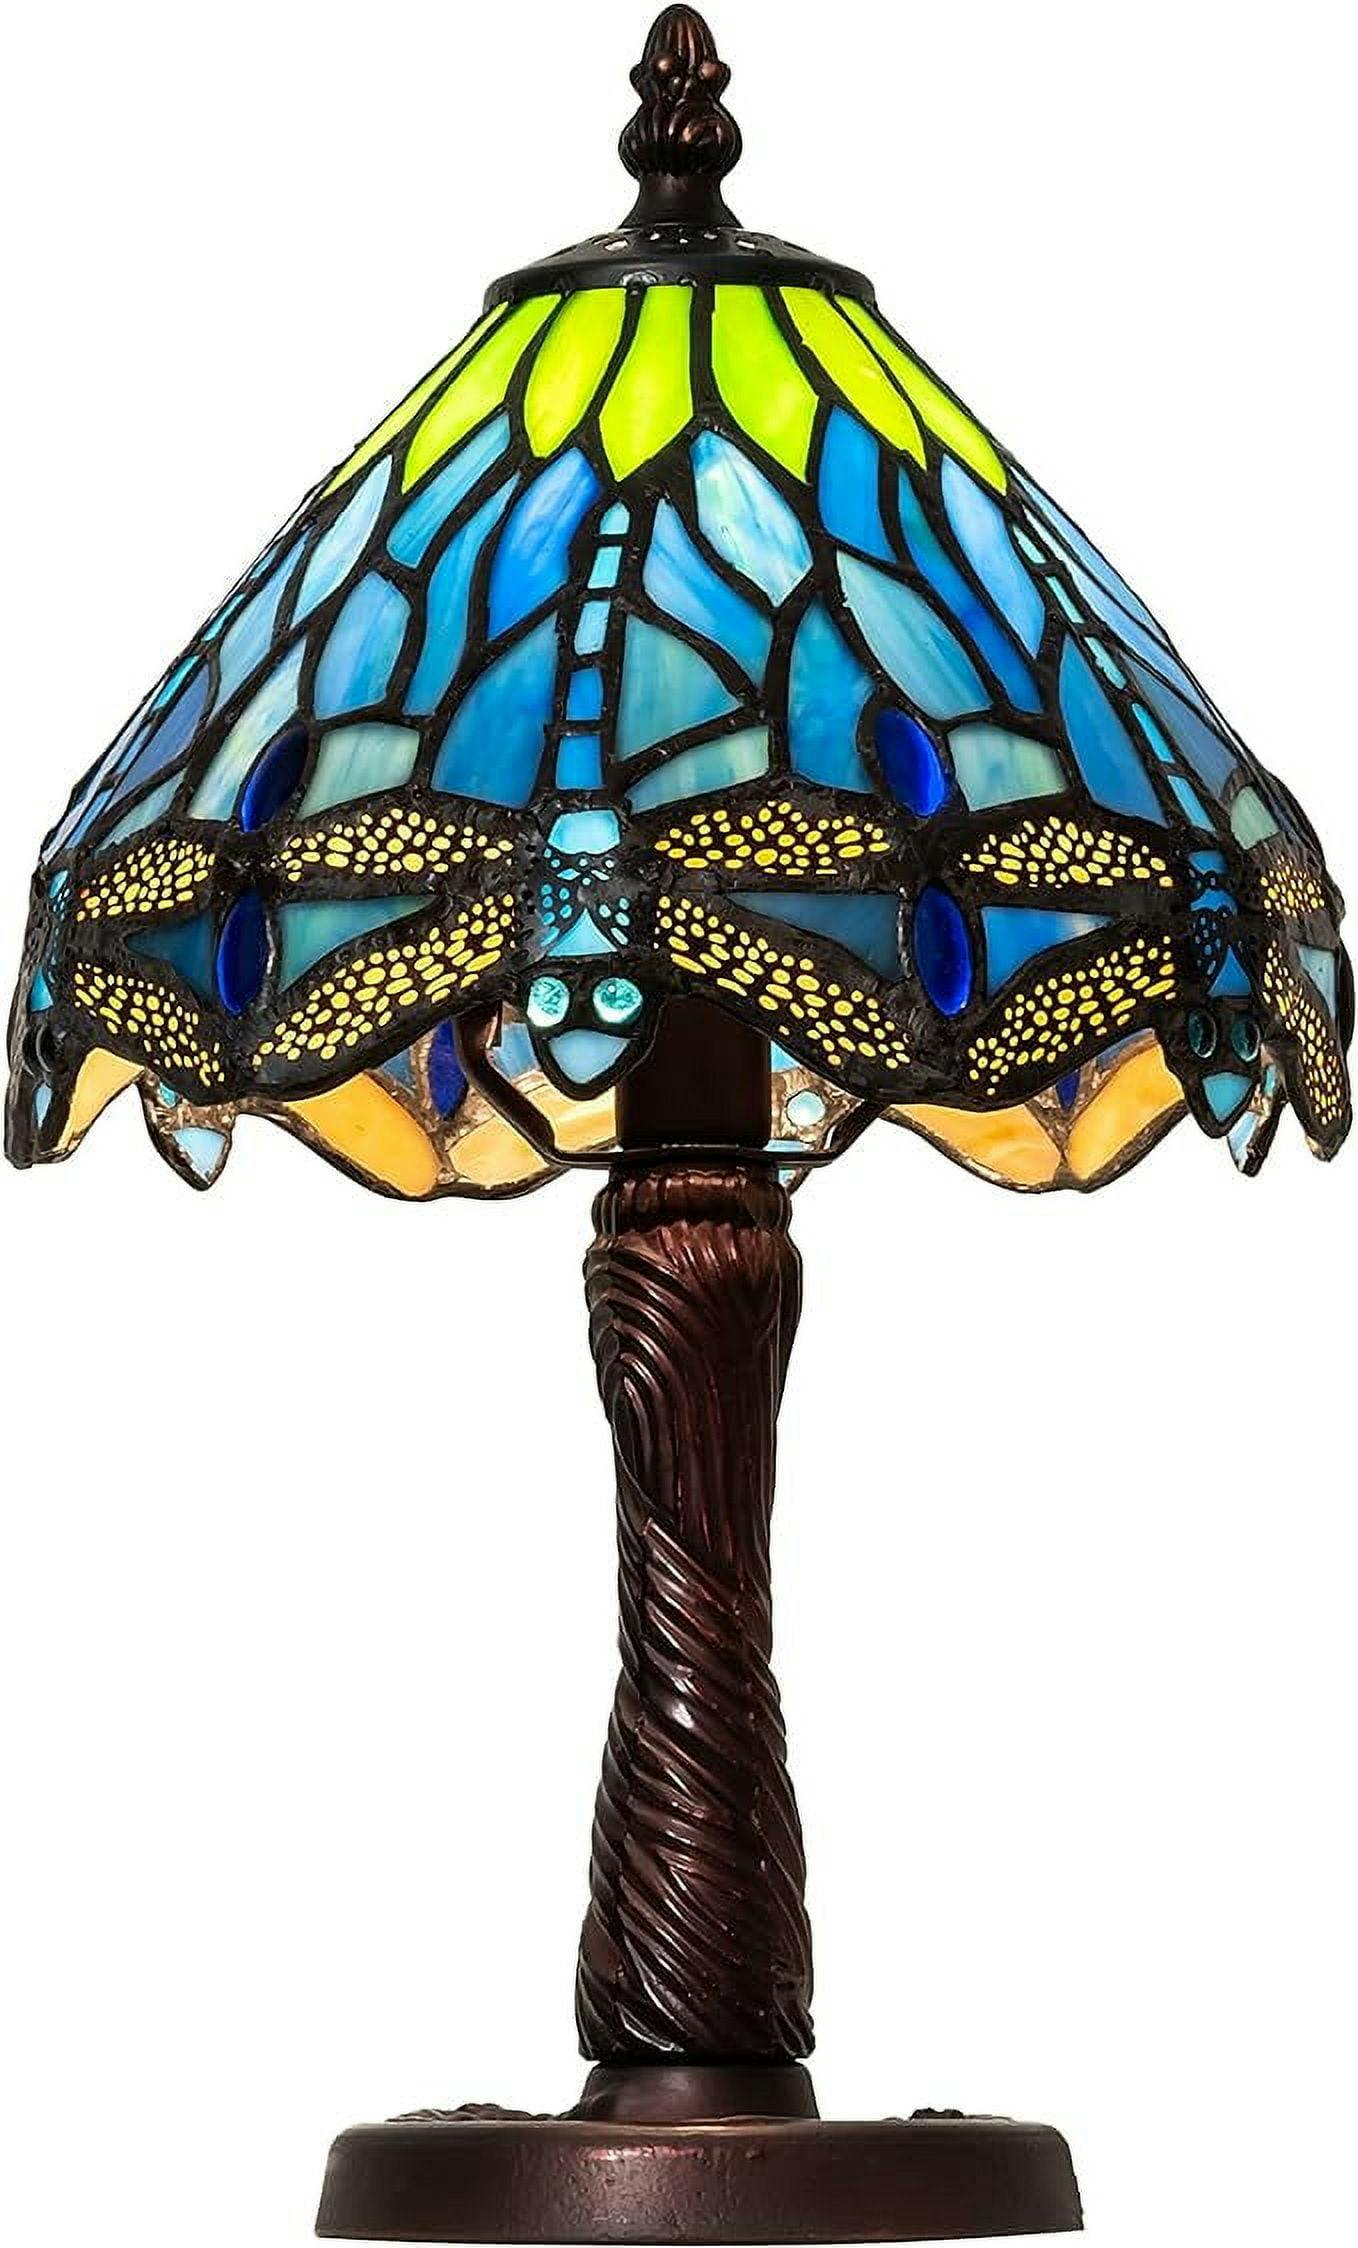 Tiffany Dragonfly 13" Mahogany Bronze Table Lamp with Stained Glass